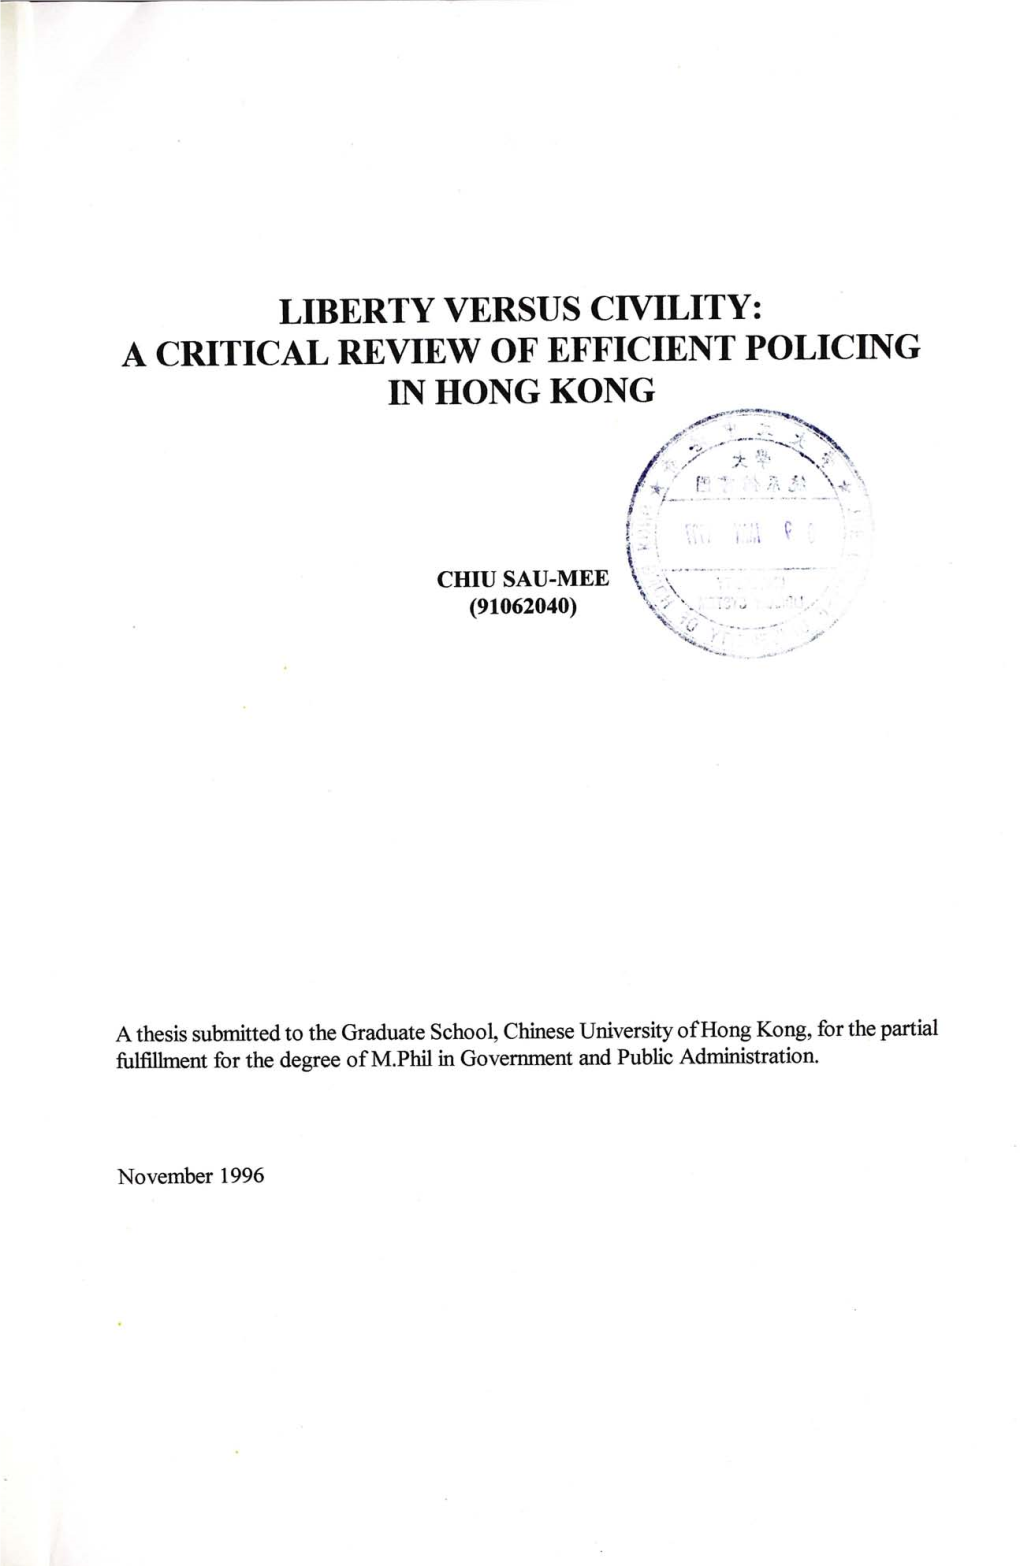 A Critical Review of Efficient Policing in Hong Kong